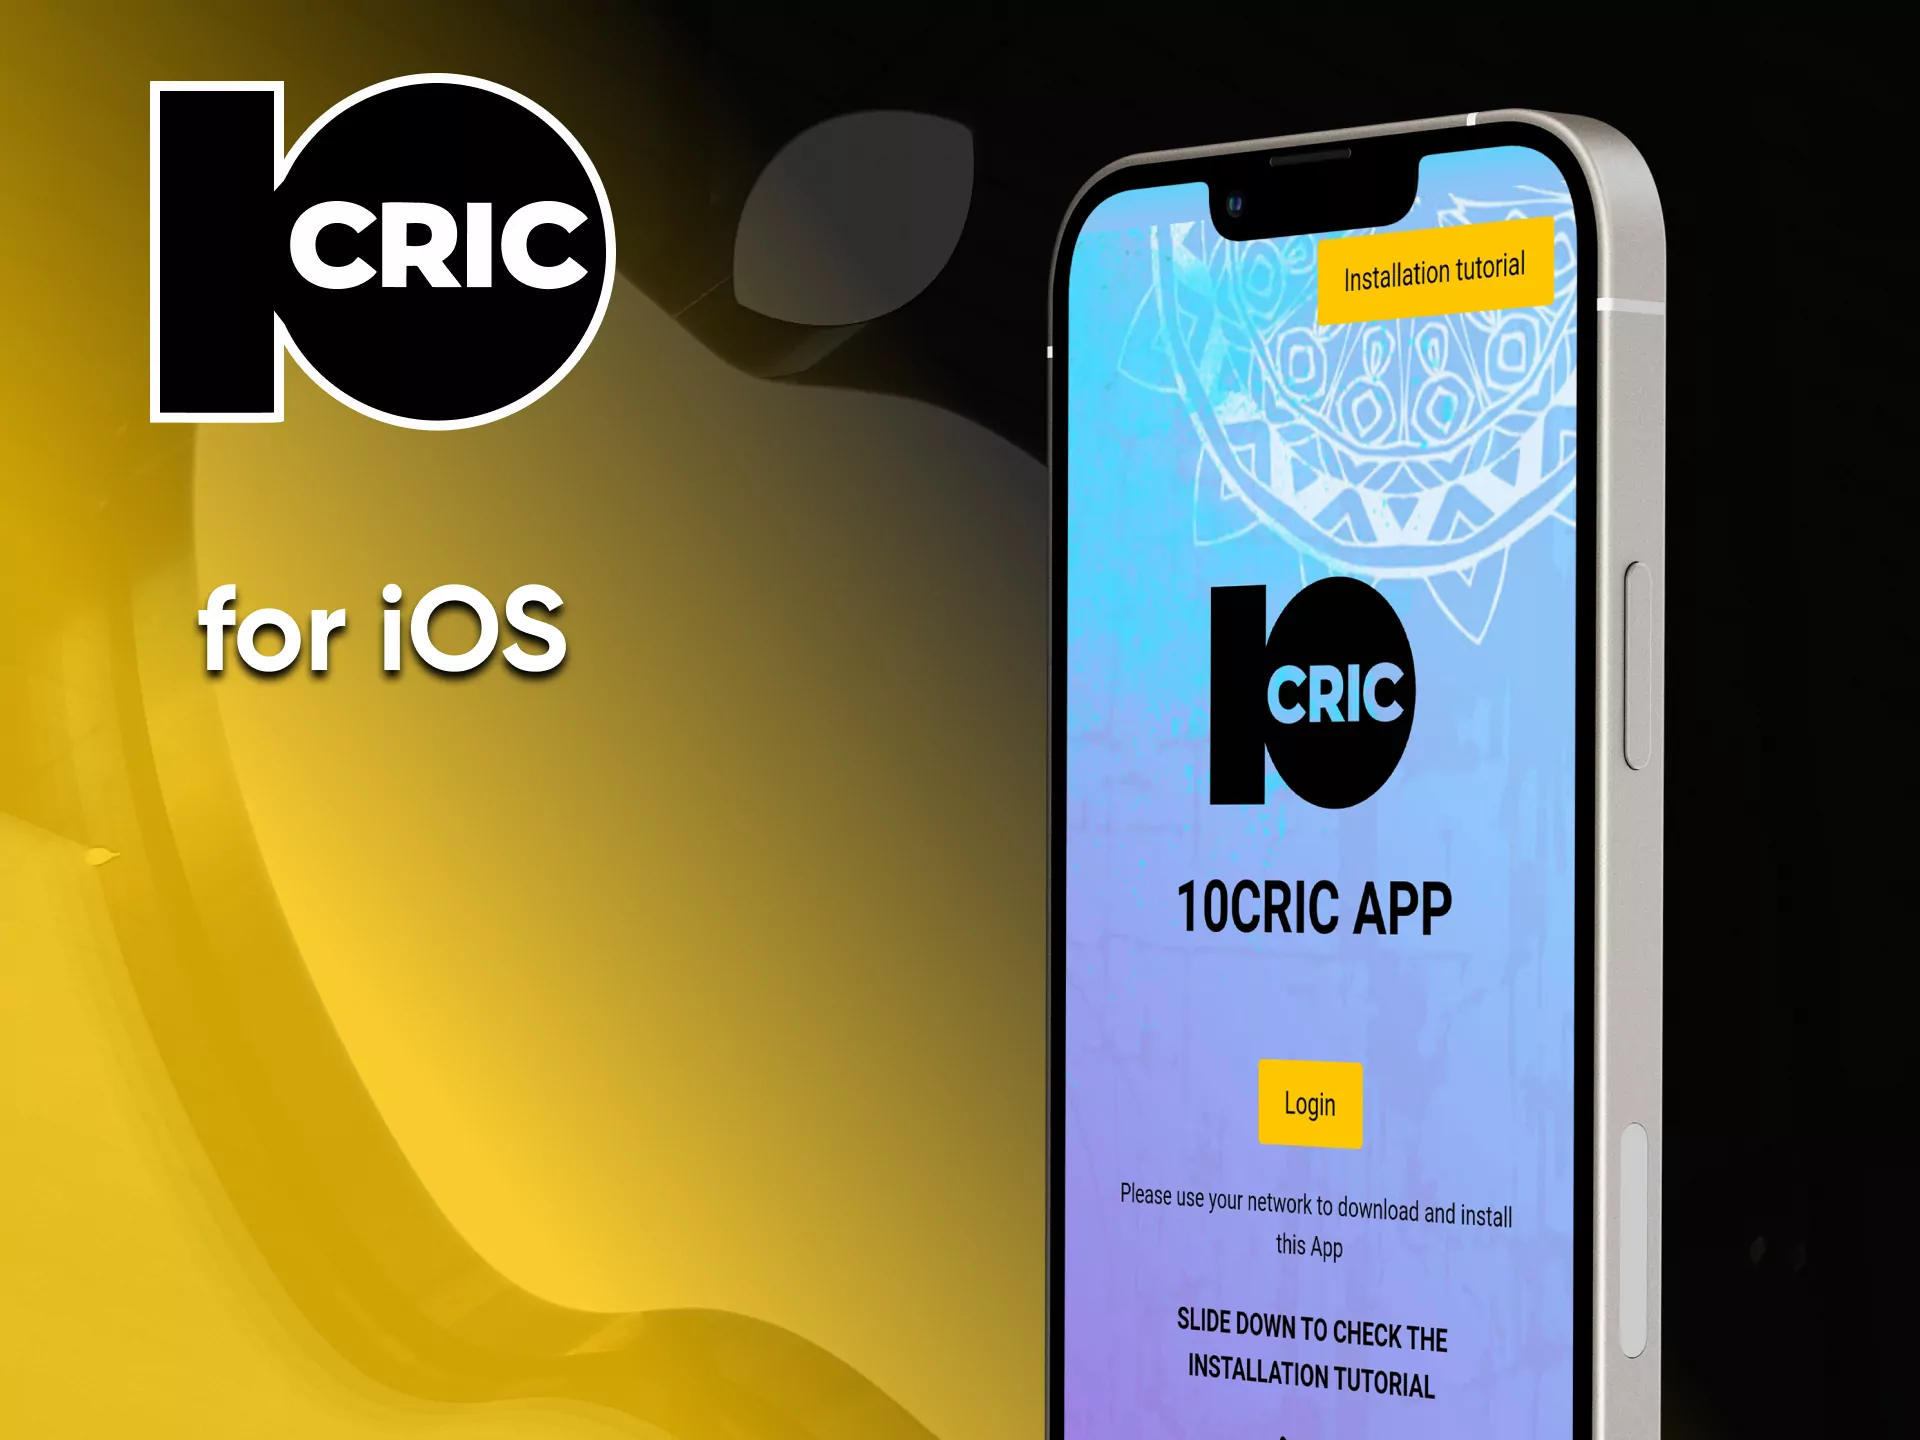 Install on your device and play at 10cric casino.